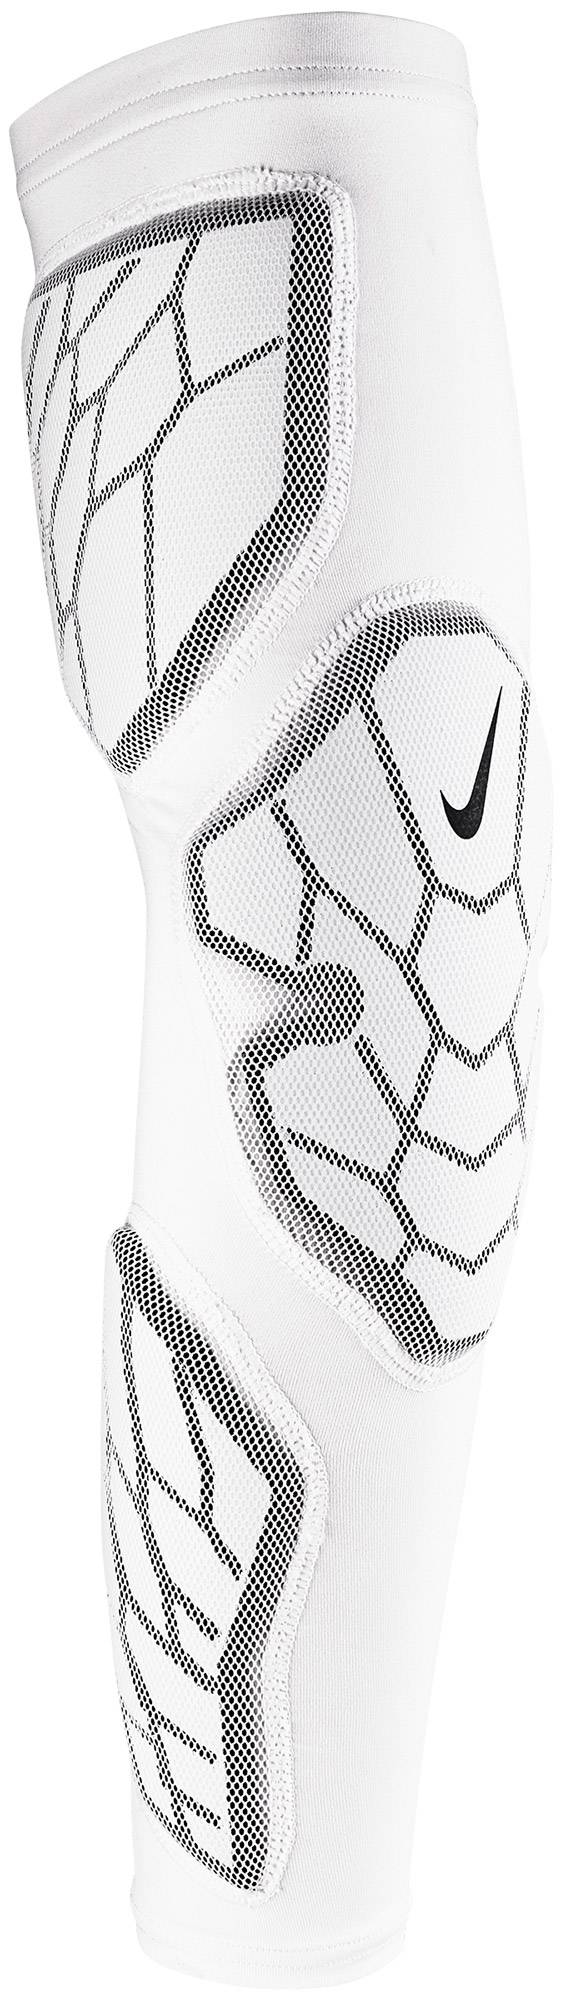 nike pro hyperstrong padded football arm sleeve